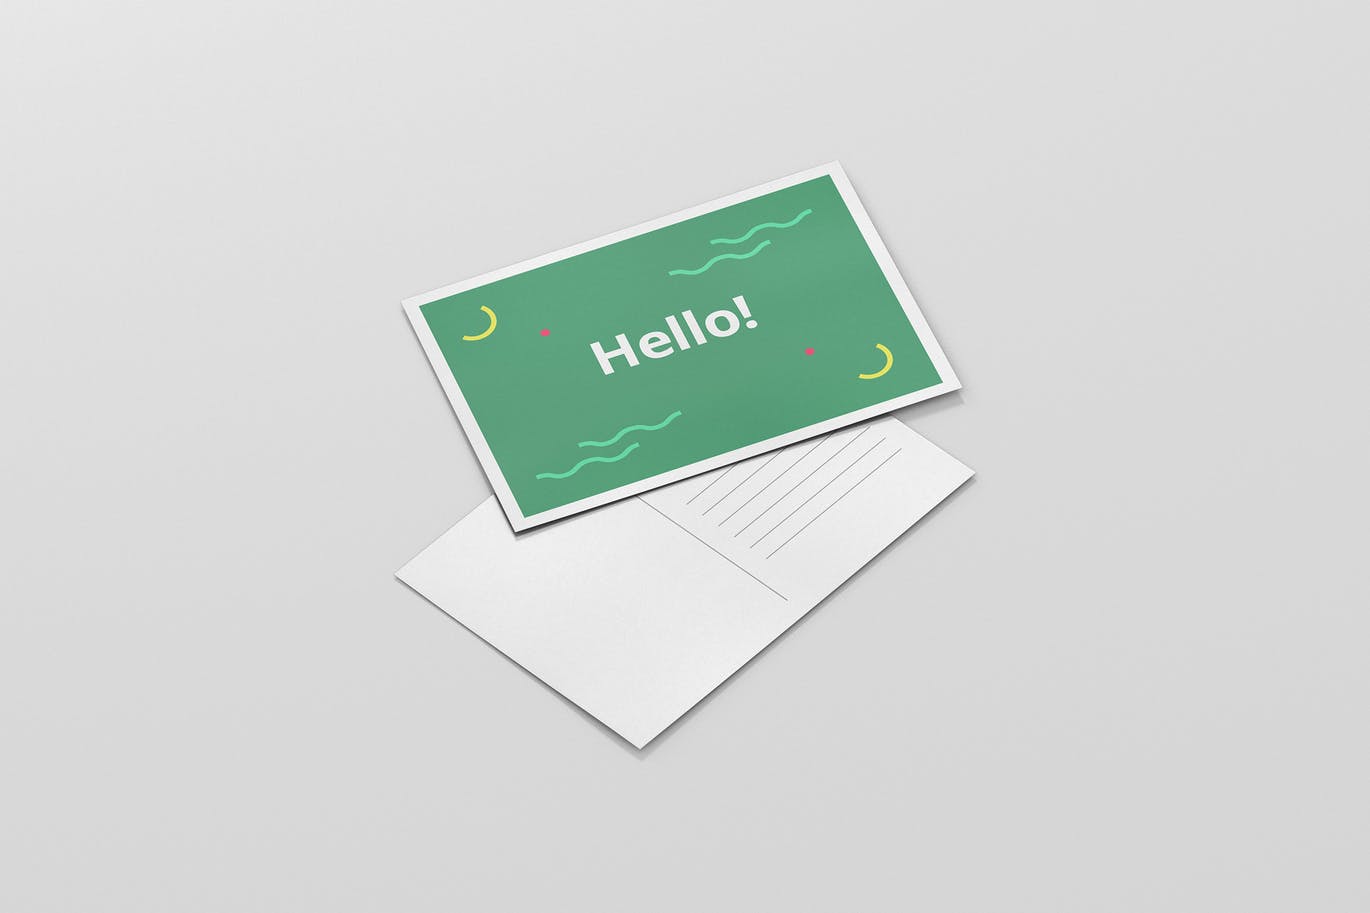 Download 35+ Awesome Postcard PSD Mockup Templates | Decolore.Net